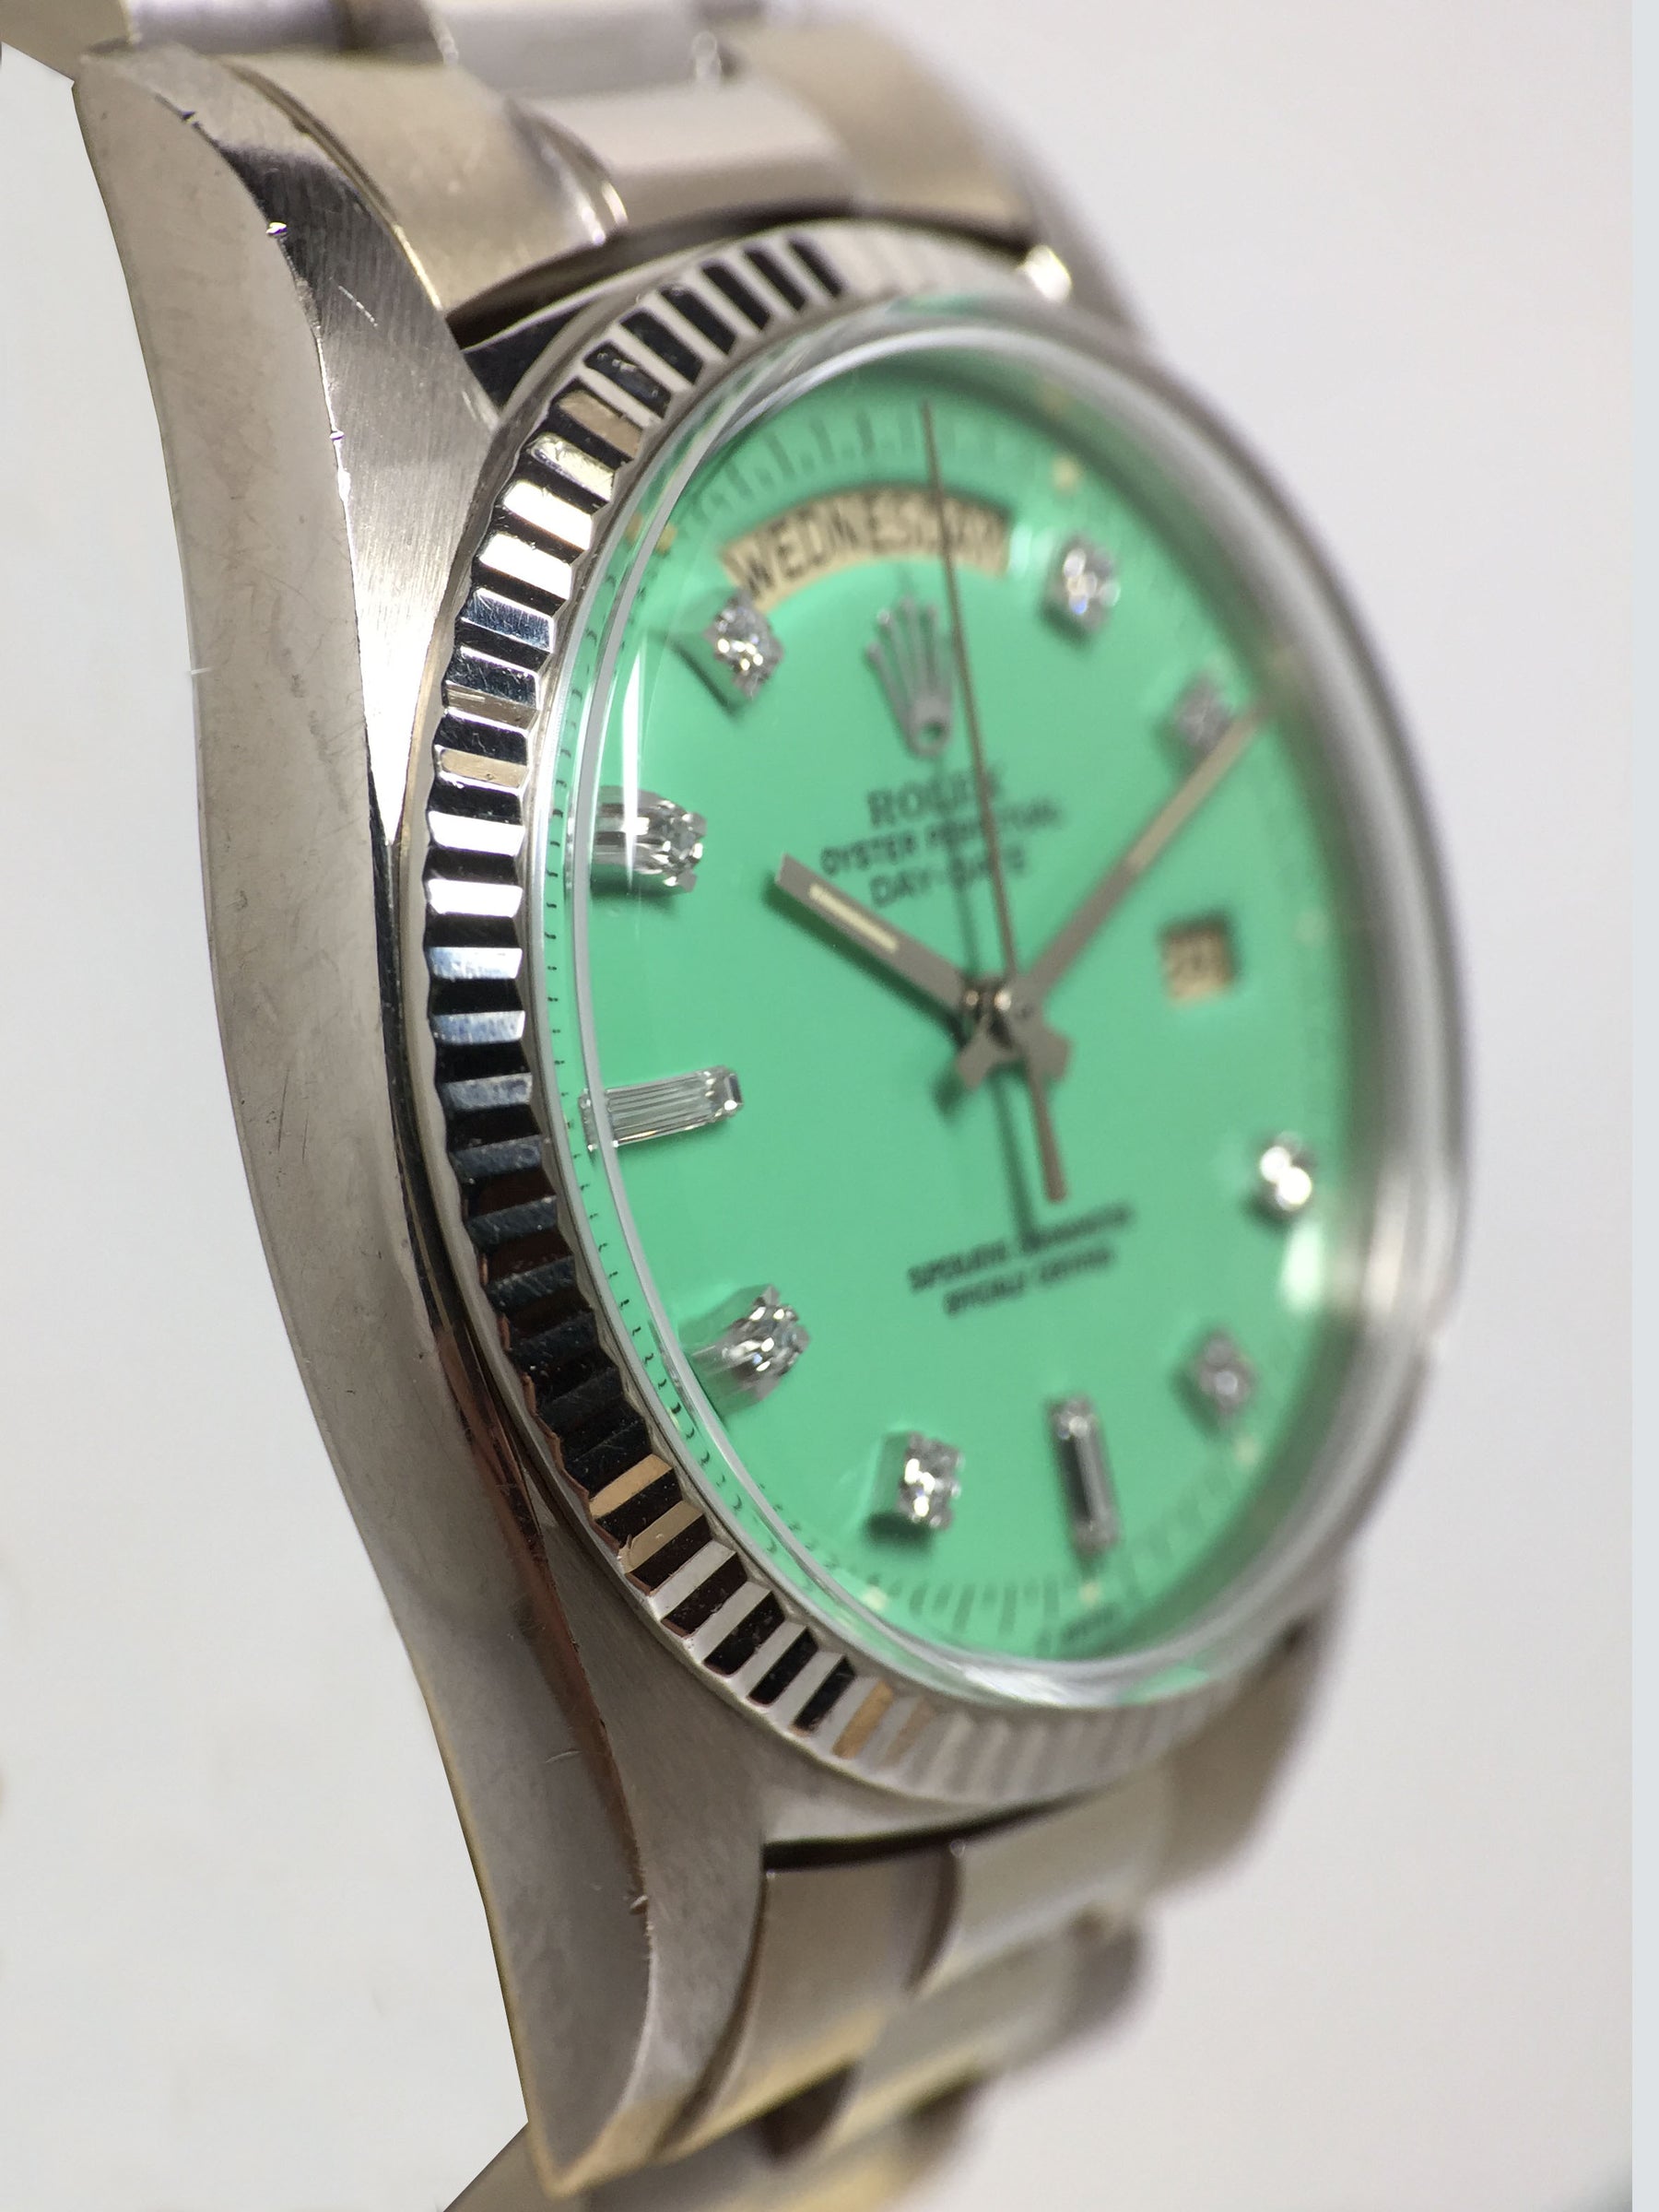 1972 Rolex Day Date Sea Foam Ref. 1803 (with Papers) - Price on Request